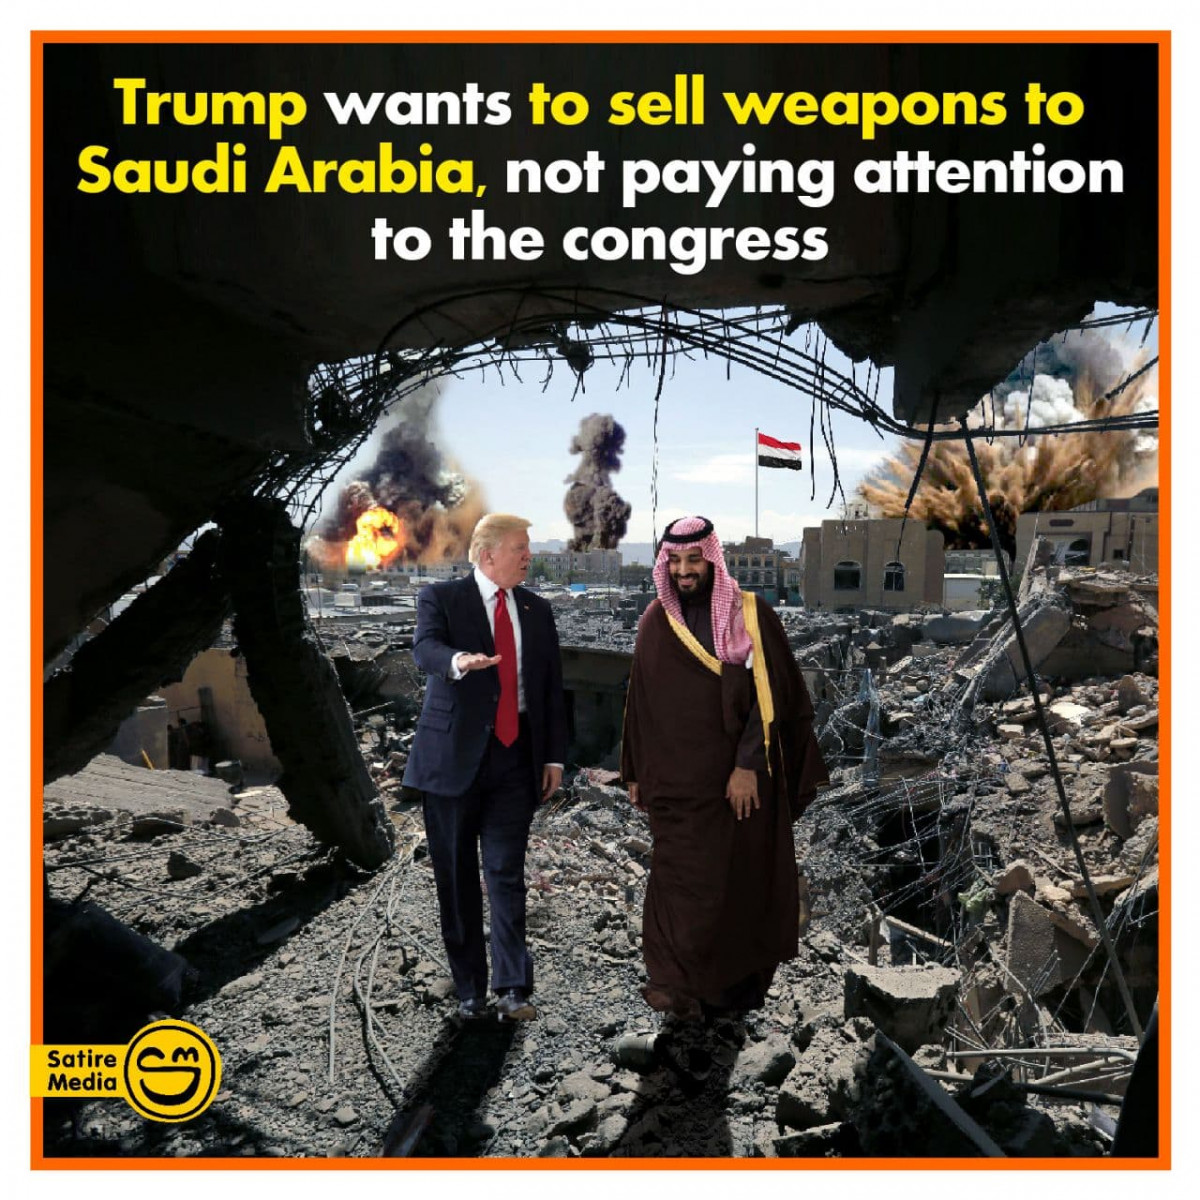 Trump wants to sell weapons to Saudi Arabia, not paying attention to the congress